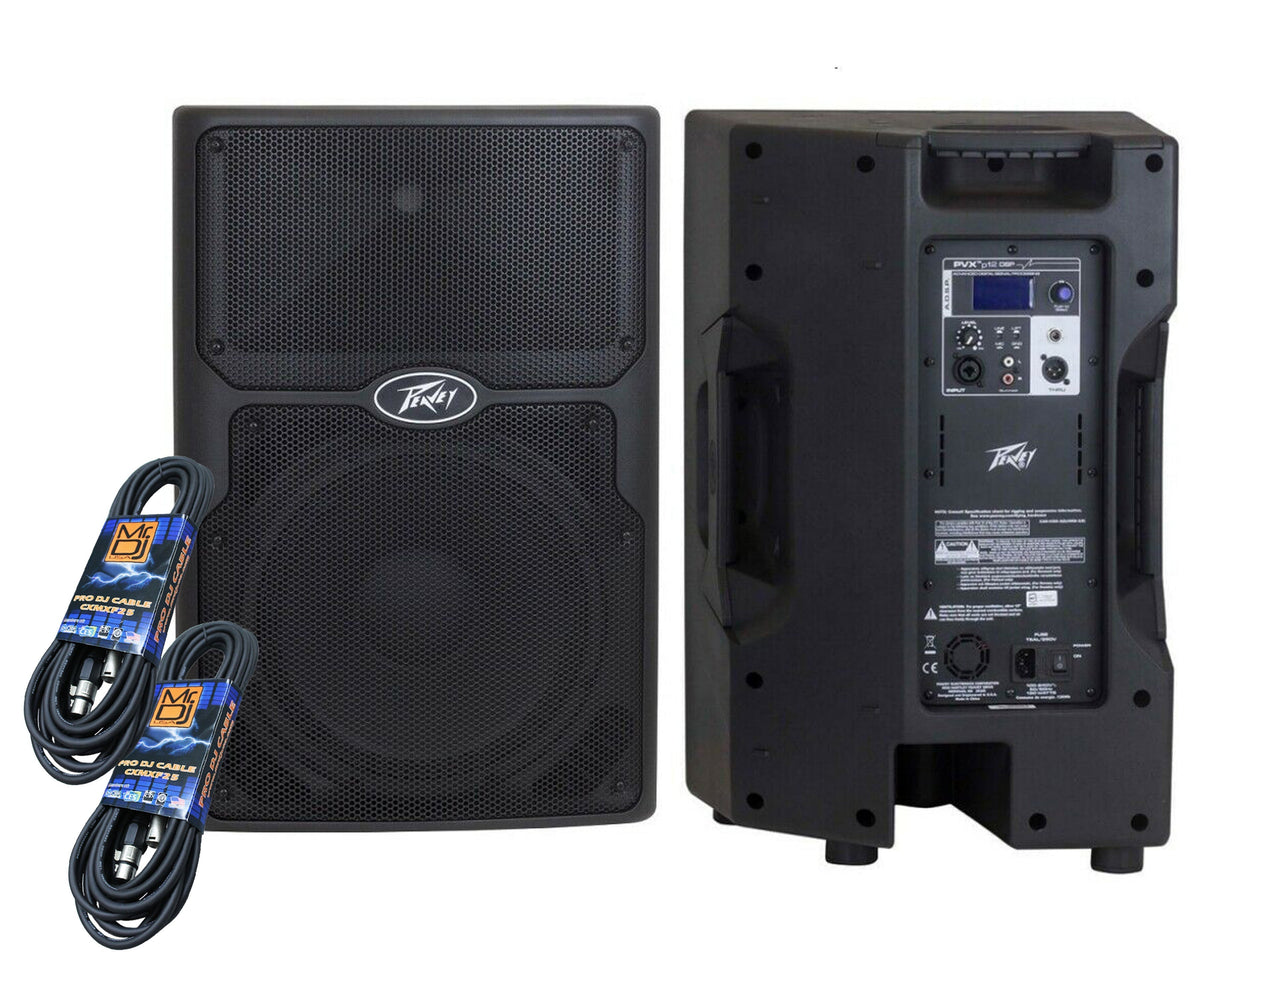 (2) PVXP12 DSP 12 inch Powered Speaker 830W 12" Powered Speaker with 1.4" Compression Driver,+ Free Mr. Dj Speaker Stands+XLR Cable